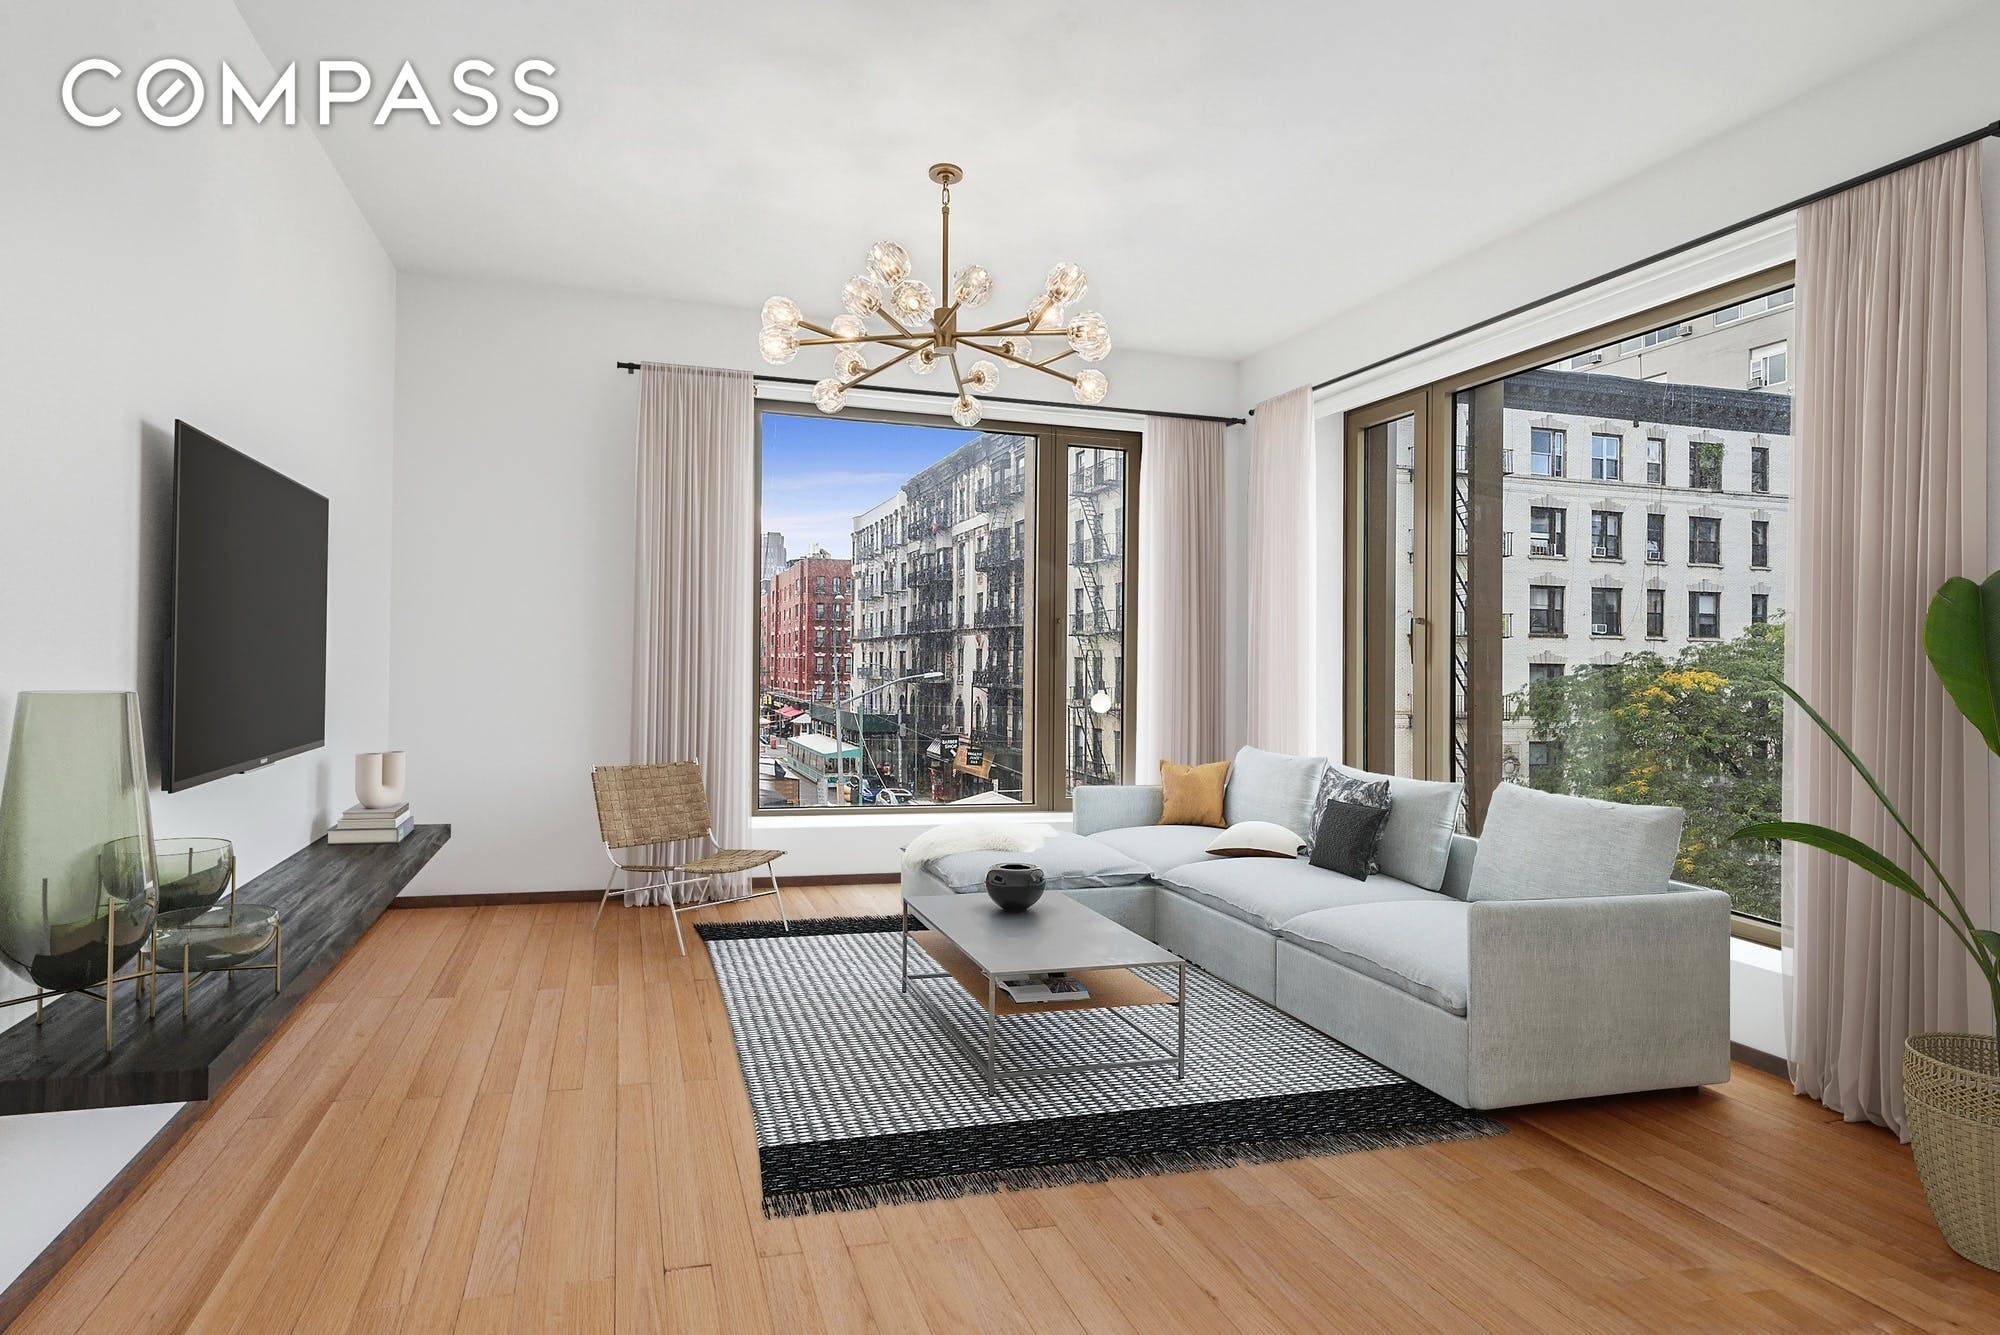 75 Kenmare s newest offering is the perfect corner two bedroom, two bathroom mint condition residence in NoLita s finest luxury condominium.